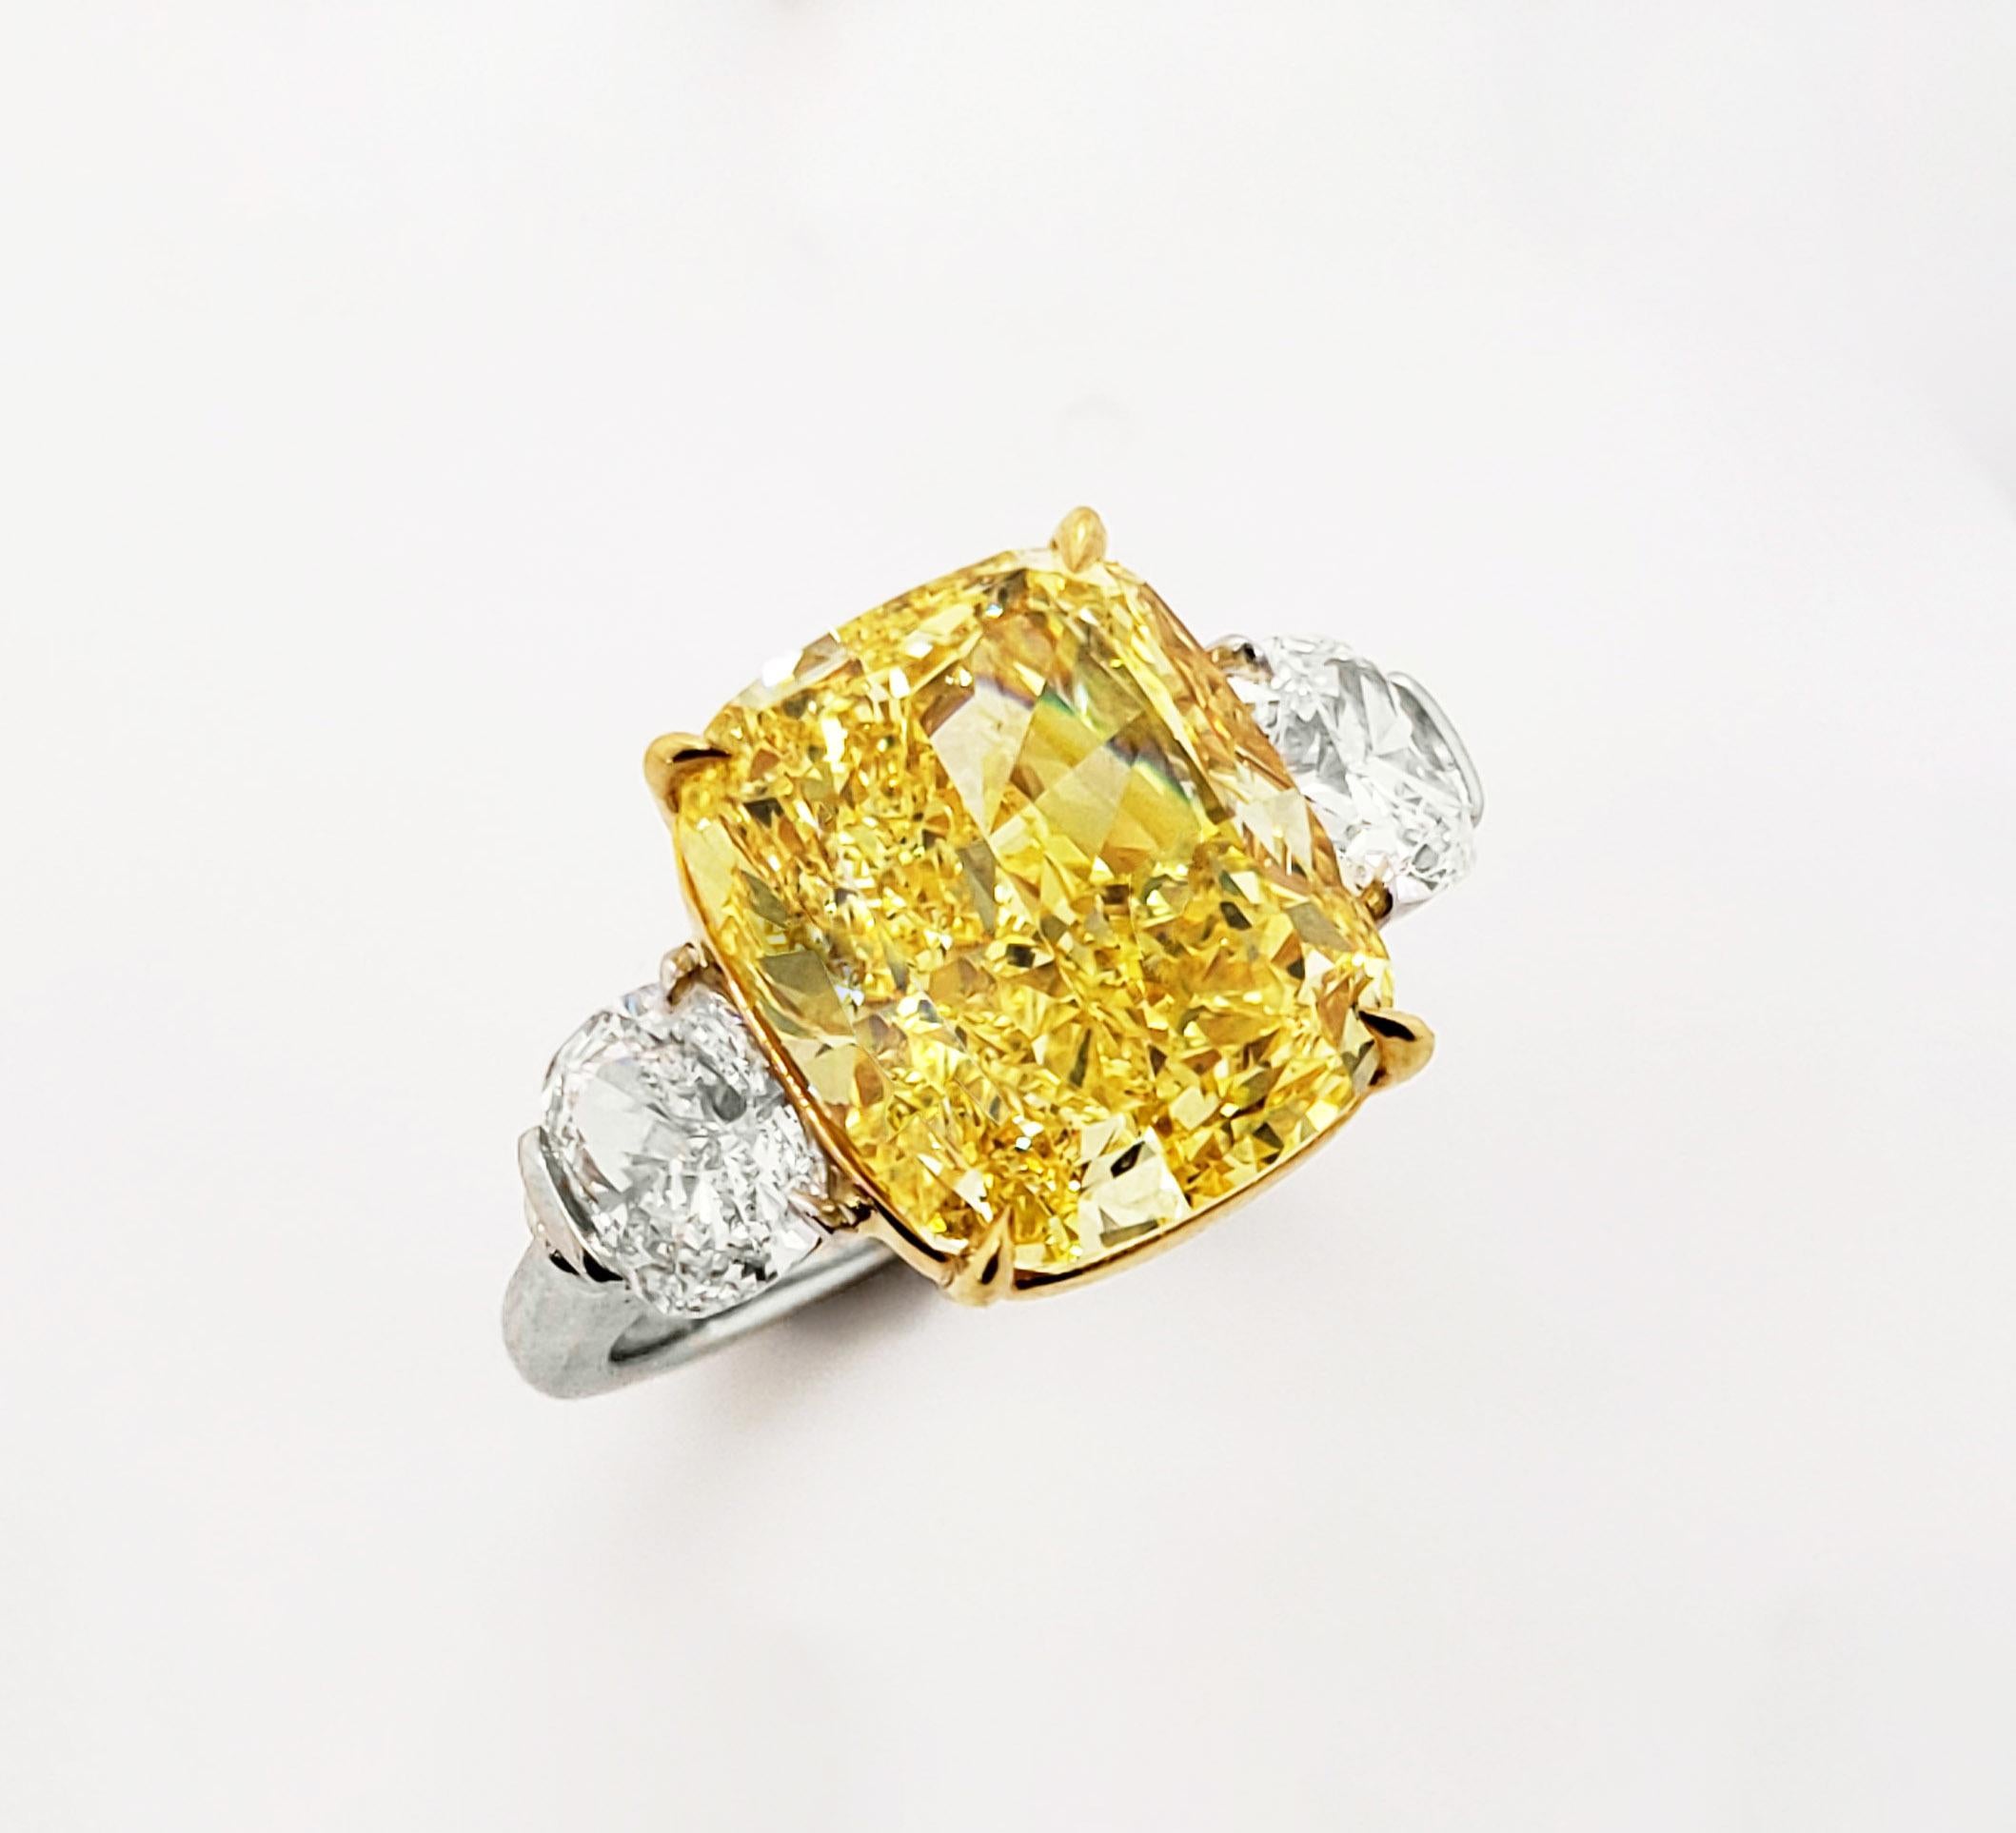 From SCARSELLI the world-renowned Natural Fancy Color diamonds, this 9+ carat Fancy Vivid Yellow cushion cut diamond (certificate picture attached for detailed center stone information) set in a hand-made 18k yellow gold and platinum ring, flanked